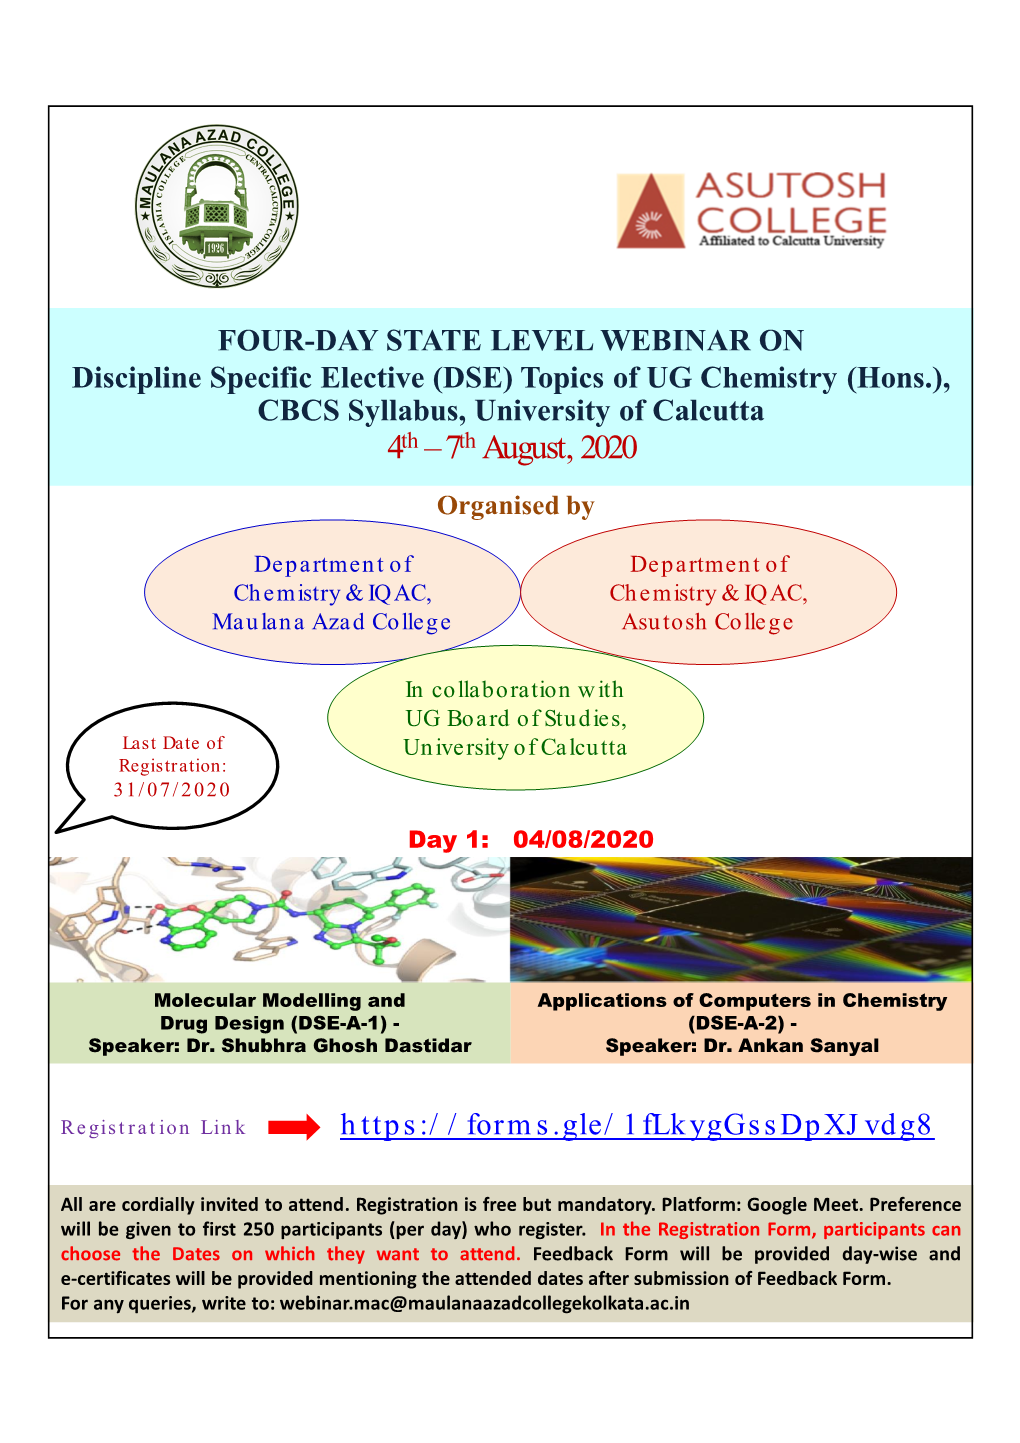 Topics of UG Chemistry (Hons.), CBCS Syllabus, University of Calcutta 4Th – 7Th August, 2020 Organised By